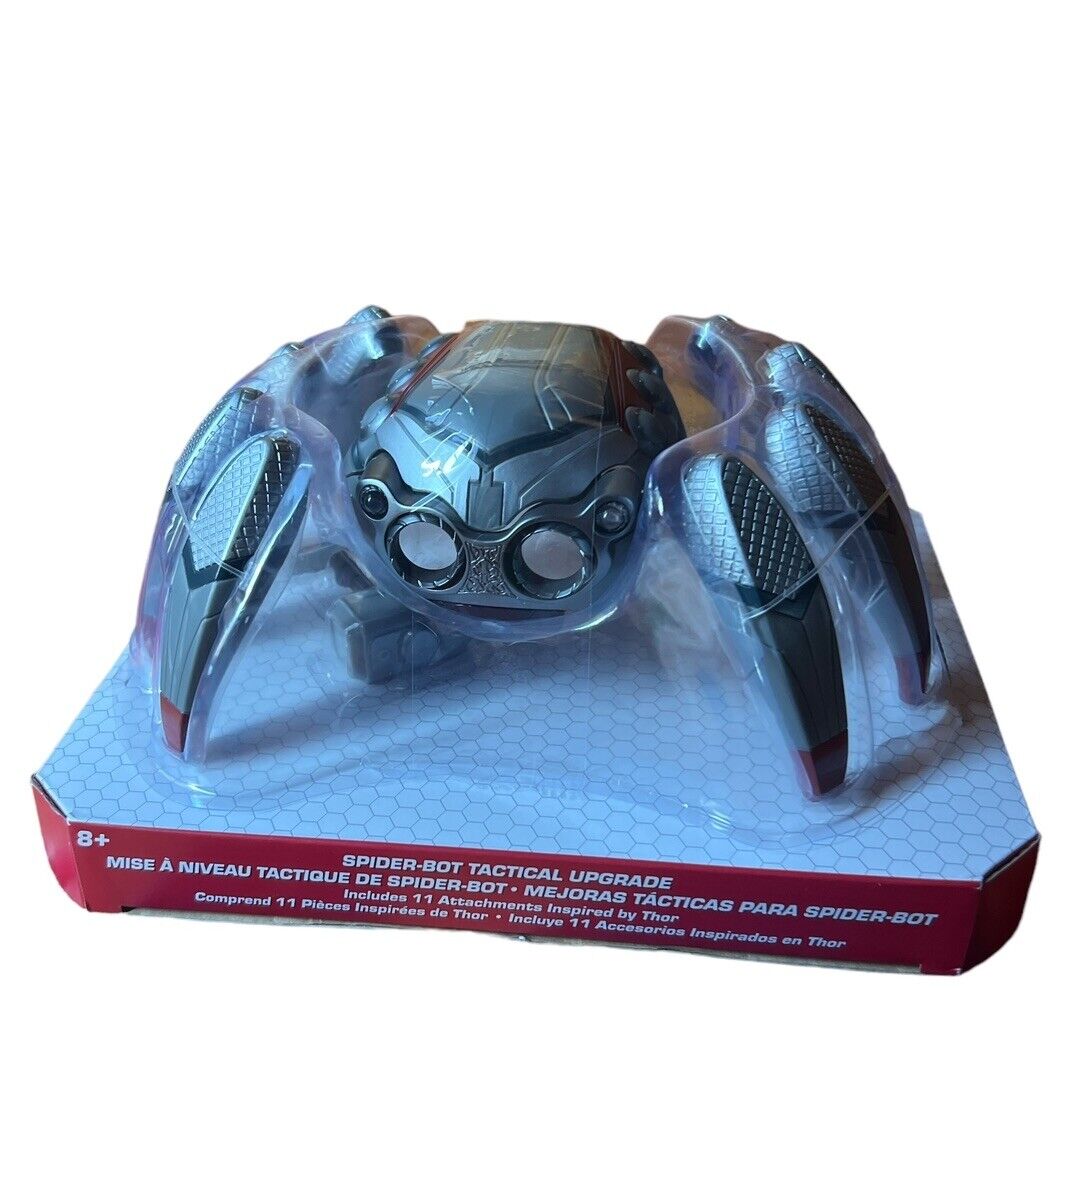 Disney Avengers Campus Spider-Bot Thor TACTICAL UPGRADE Spiderbot